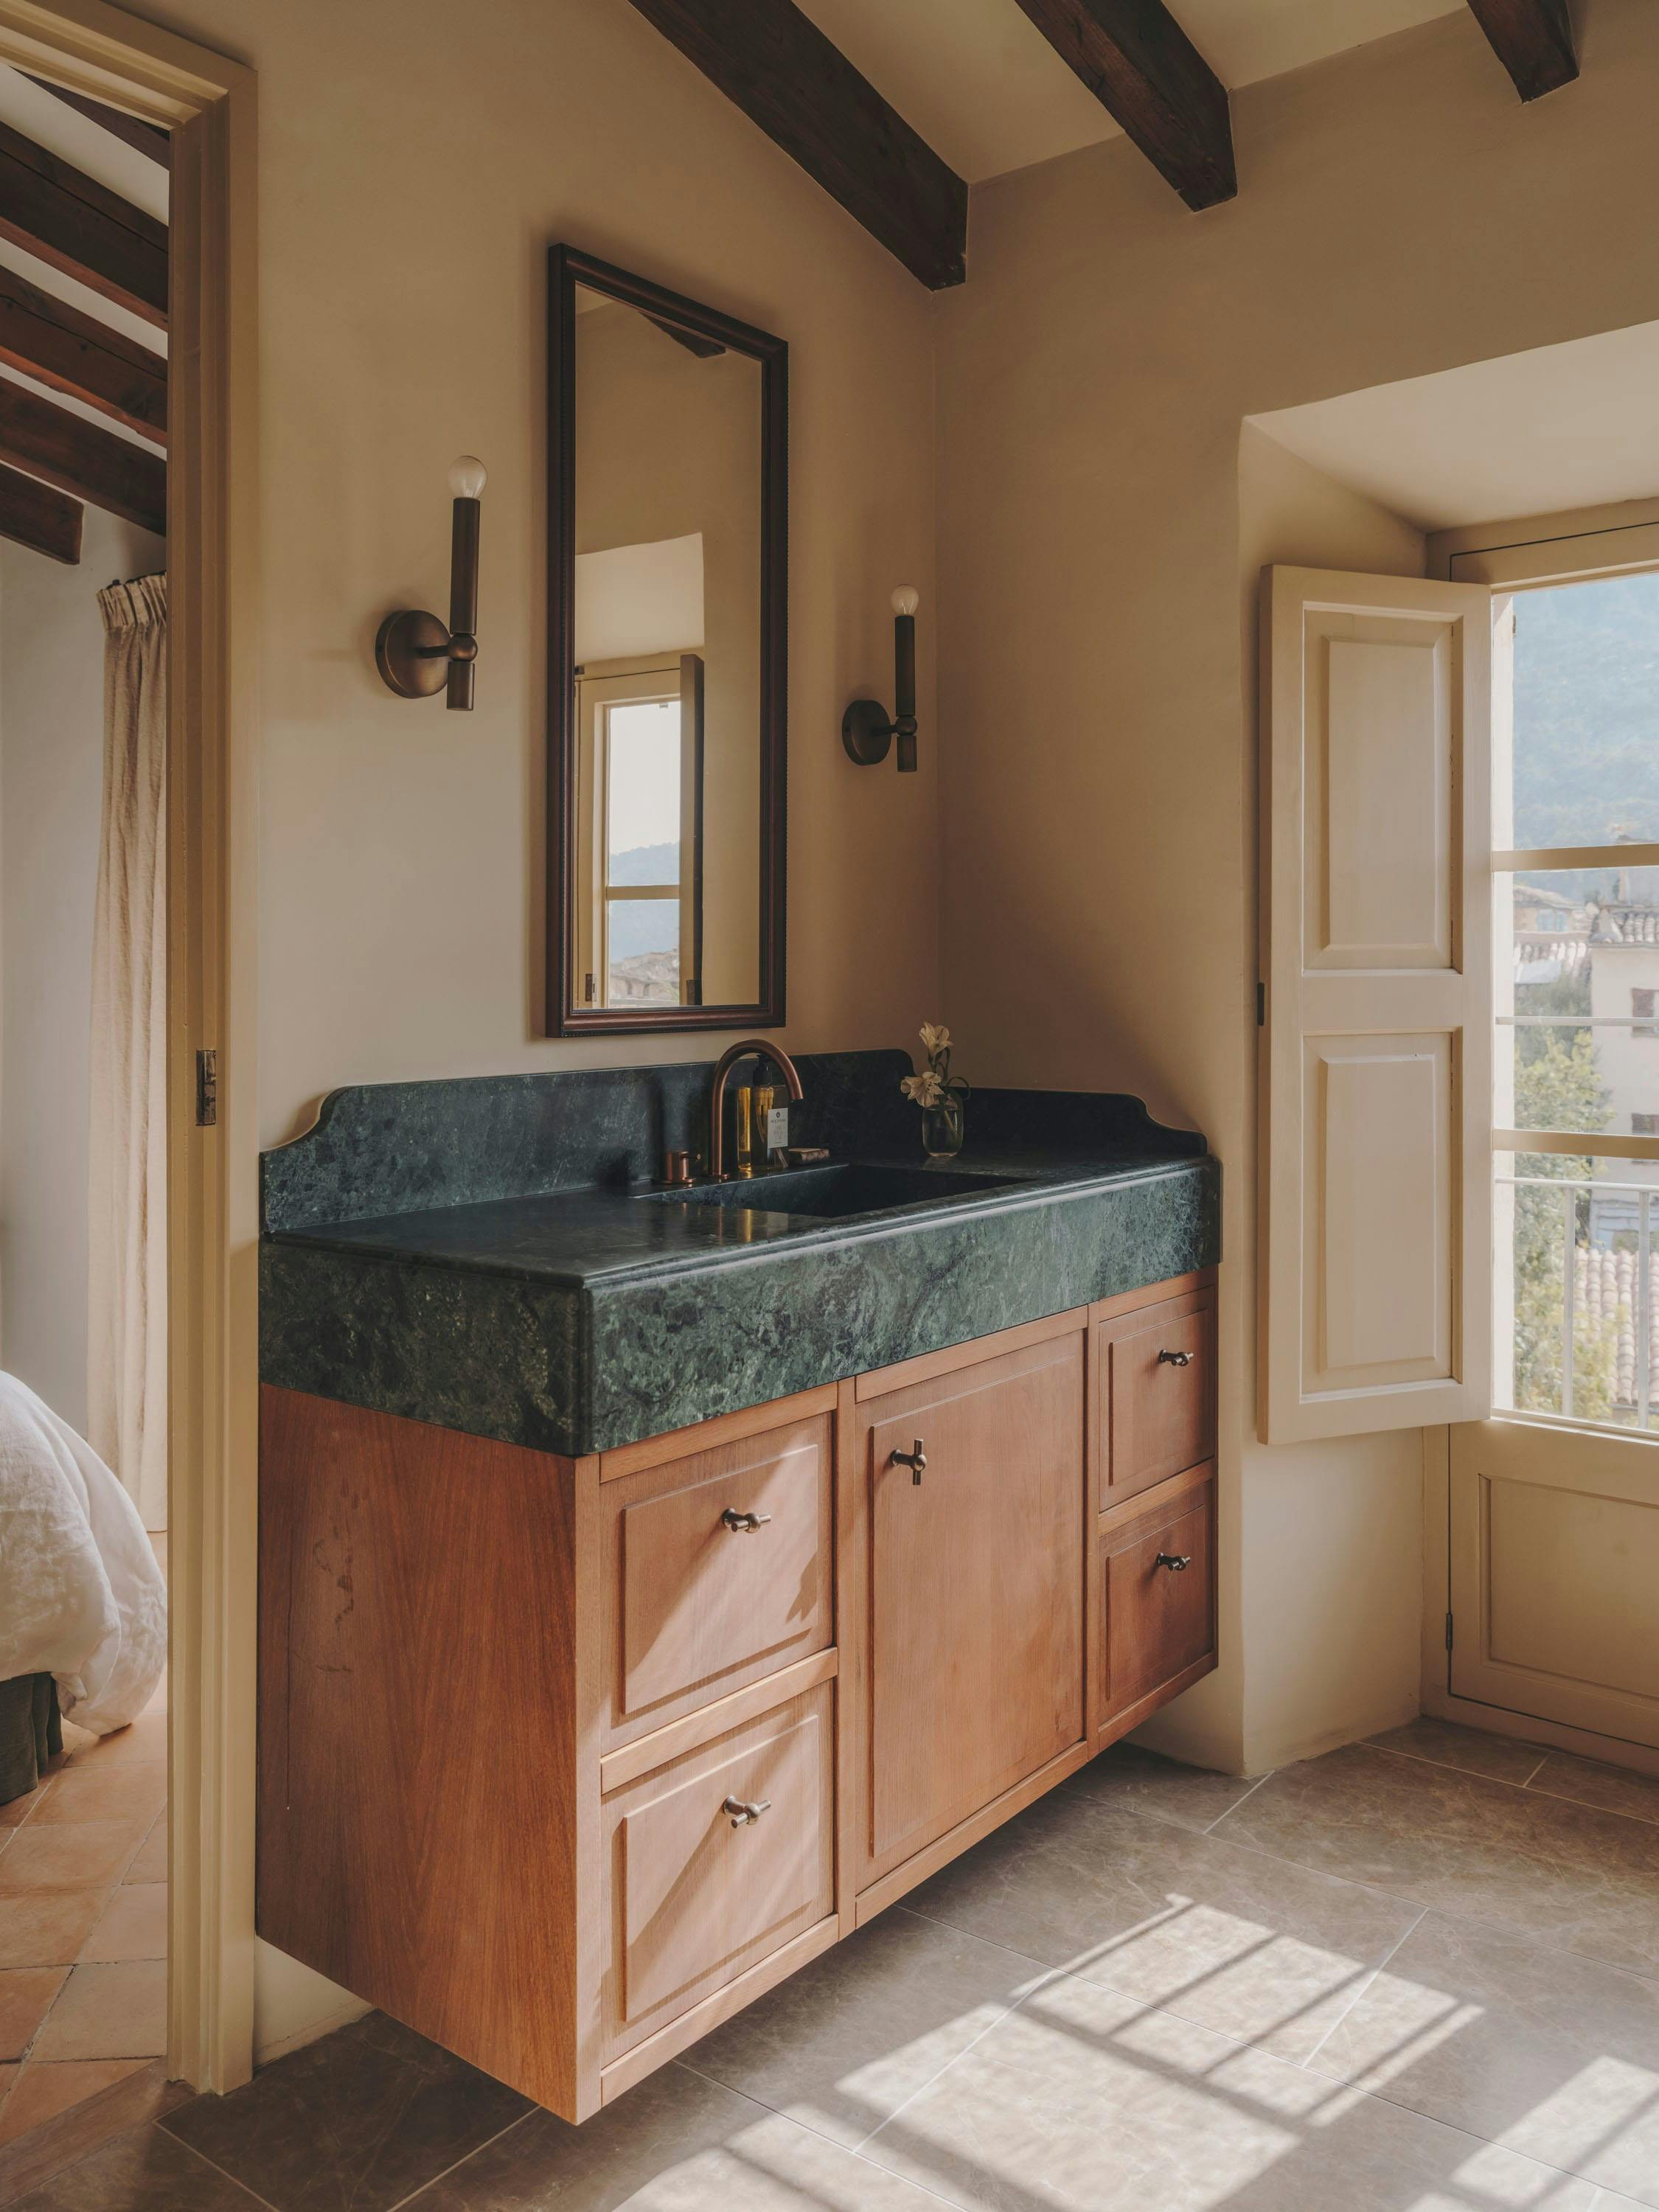 The image features a large, modern bathroom with a double sink vanity. The vanity is made of wood and has a green marble countertop. The sink is placed under a large window, allowing natural light to enter the room. The bathroom also has a large mirror above the sink, adding to the overall aesthetic.

In addition to the sink and vanity, there are two bottles placed on the countertop, likely containing bathroom essentials. A towel hangs nearby, and a cup is also visible on the countertop. The bathroom appears to be well-mainta